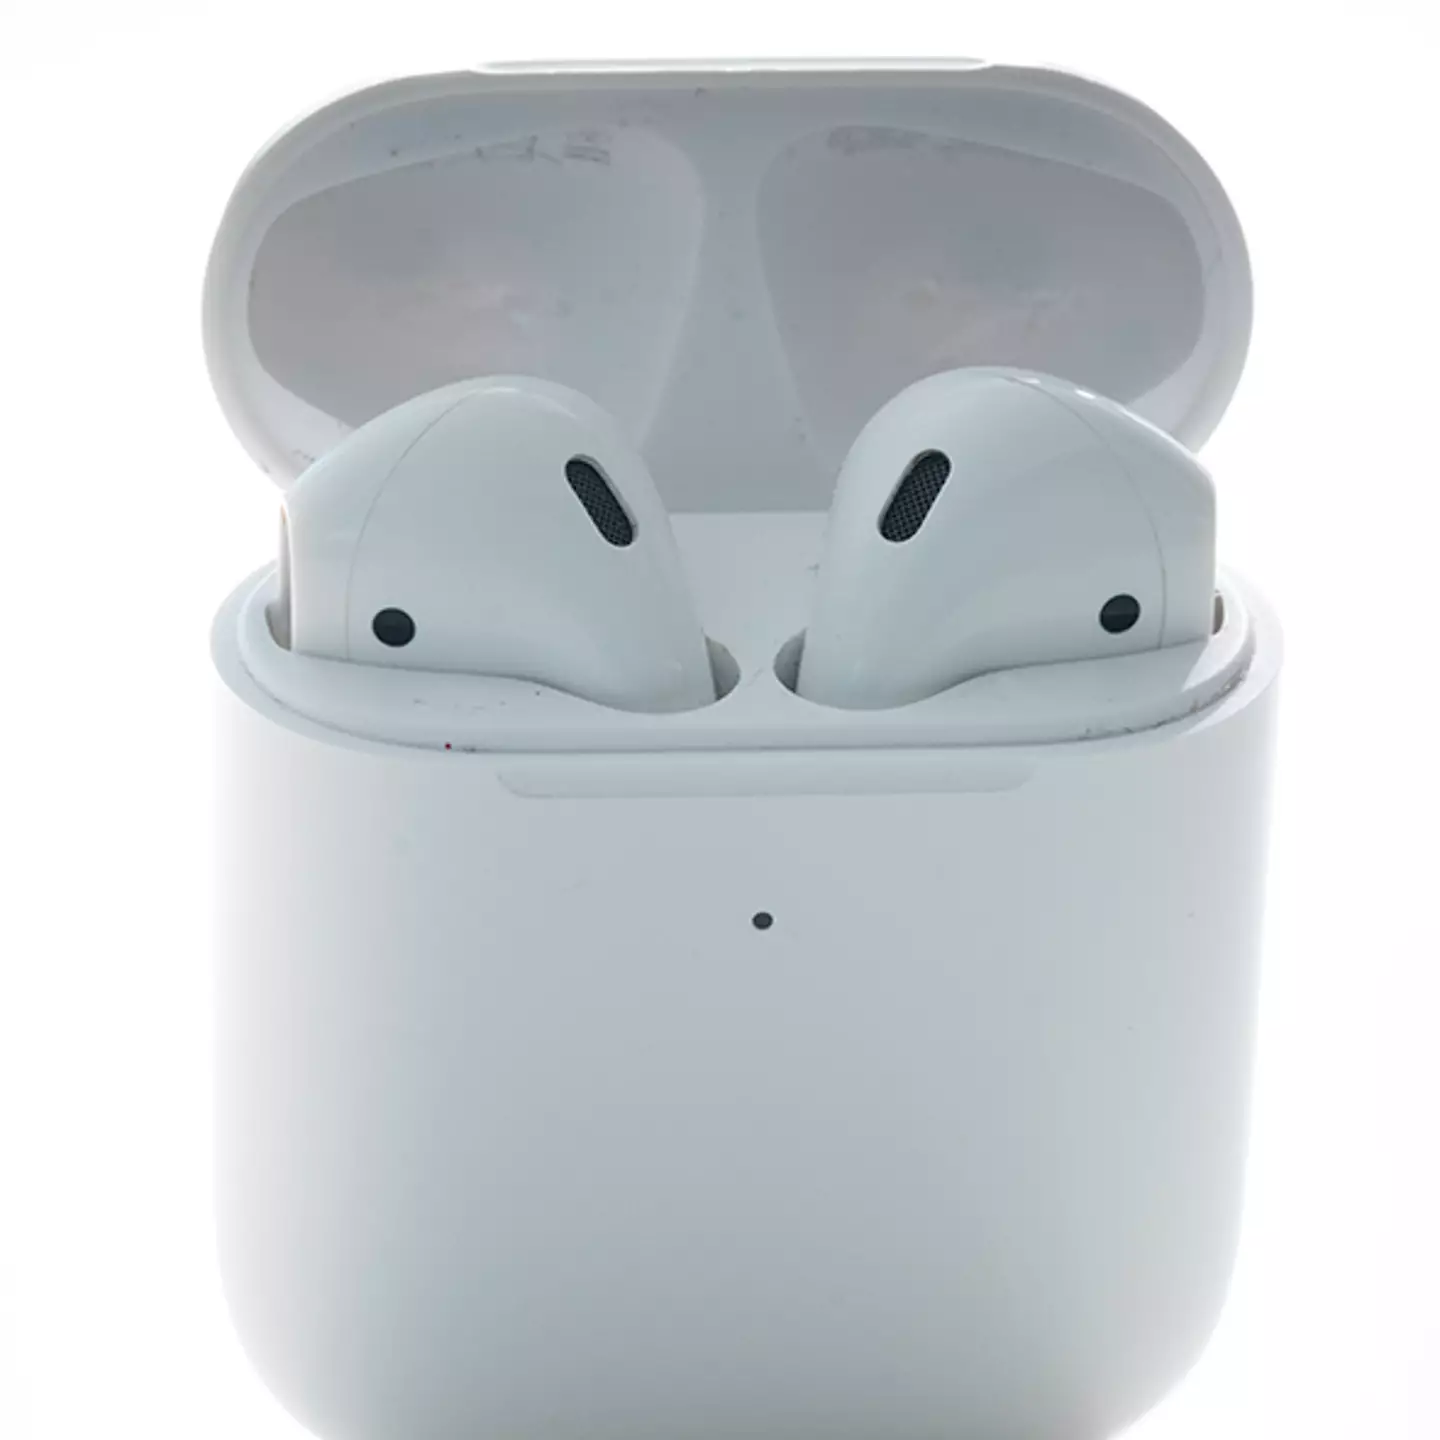 Apple rumours claim budget-friendly 'AirPods Lite' could be coming to market later this year